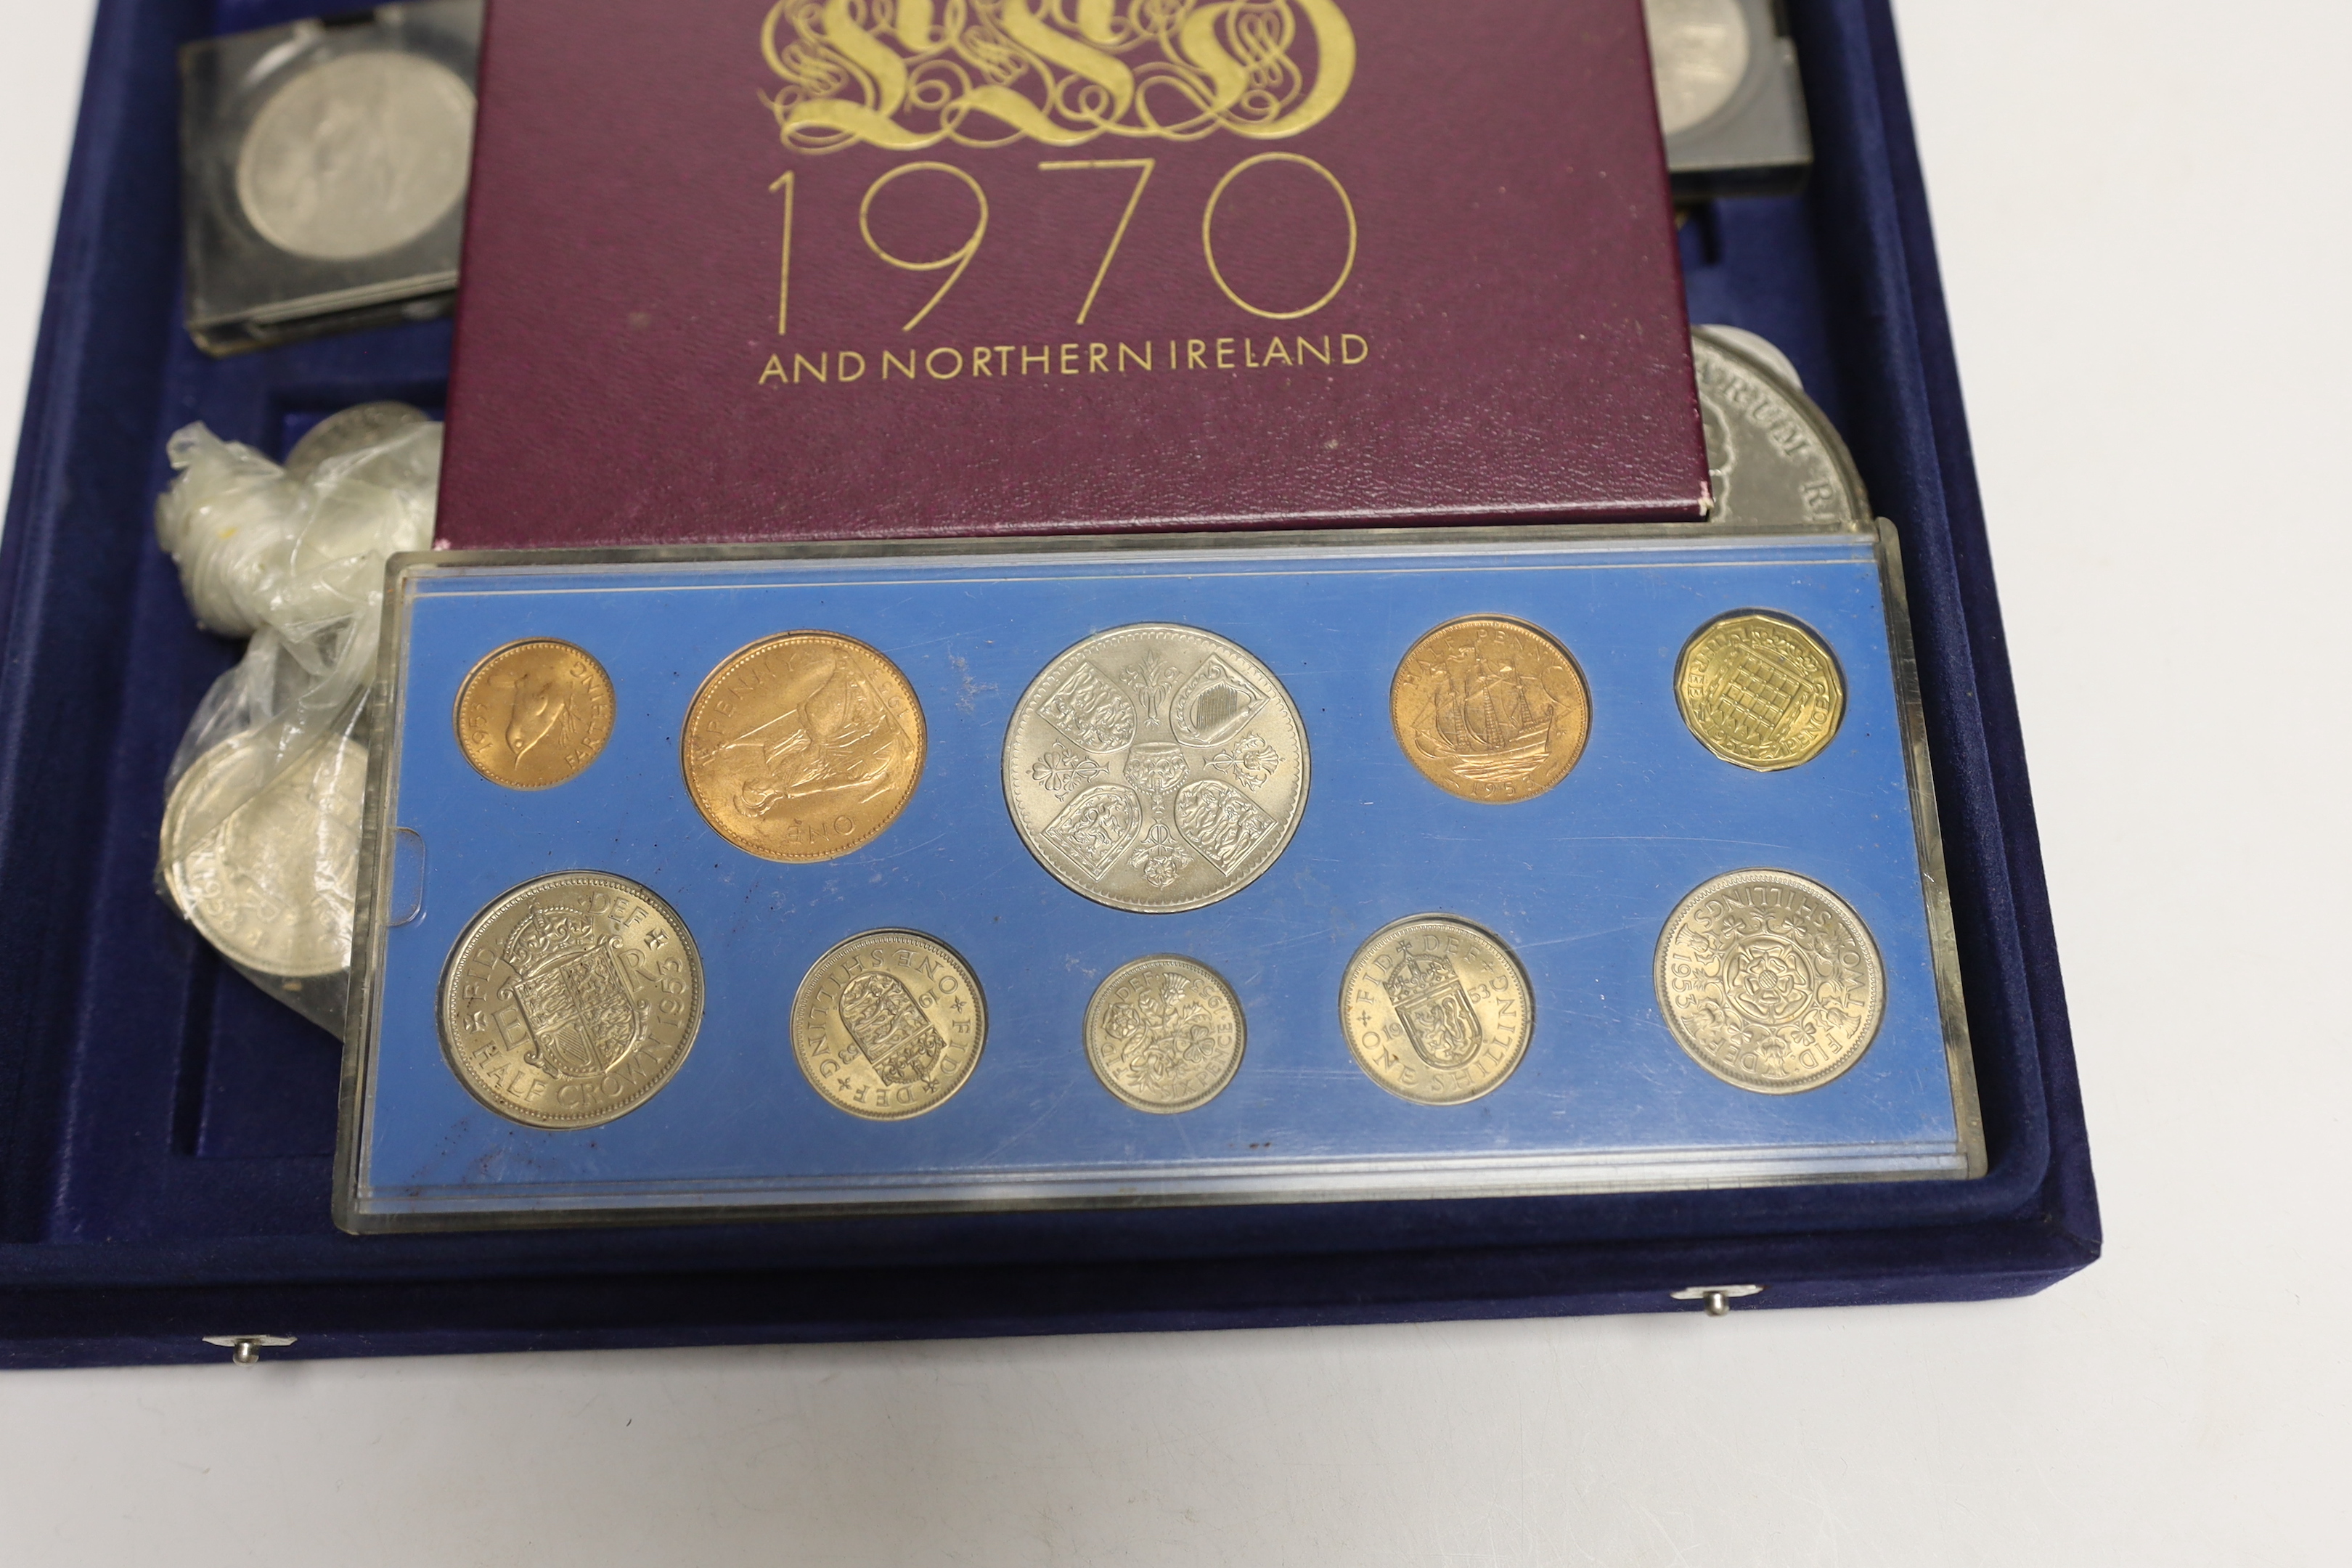 World coins and British commemorative medals, including George IV and Victoria coronation medals, QEII 1953 BUNC year set, 1970 proof coin set, various GVI to QEII half crowns and mix of 18th / 20th century world coins